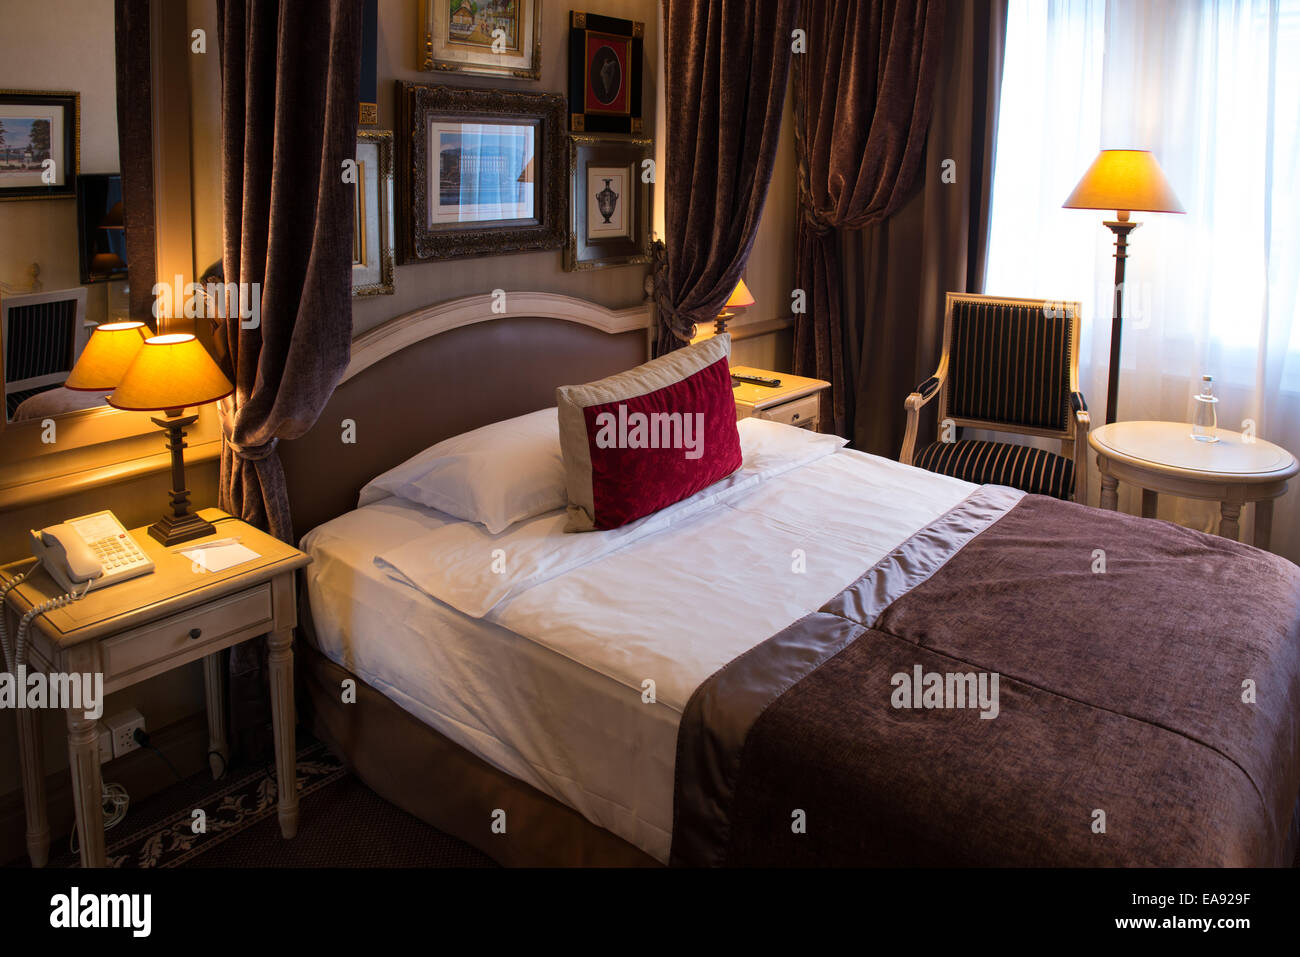 luxurious hotel room with a bed covered with a brown jacket and red pillow Stock Photo